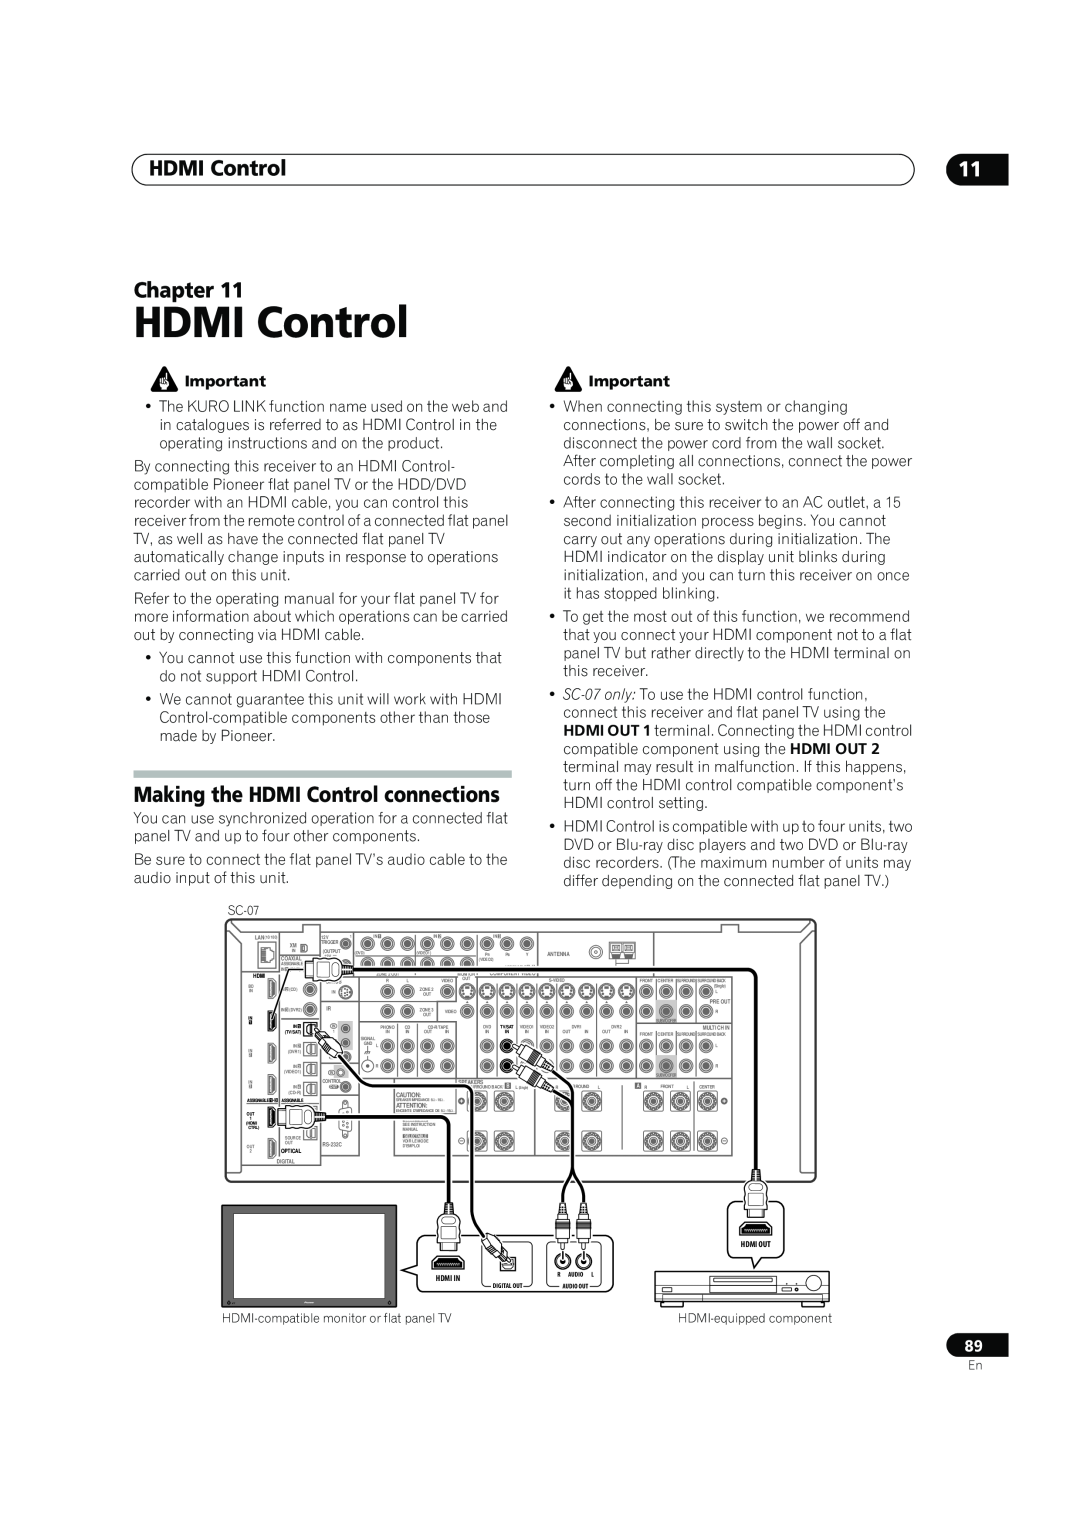 Pioneer SC-05, SC-07 manual Making the HDMI Control connections, Chapter, HDMI-compatible monitor or flat panel TV 